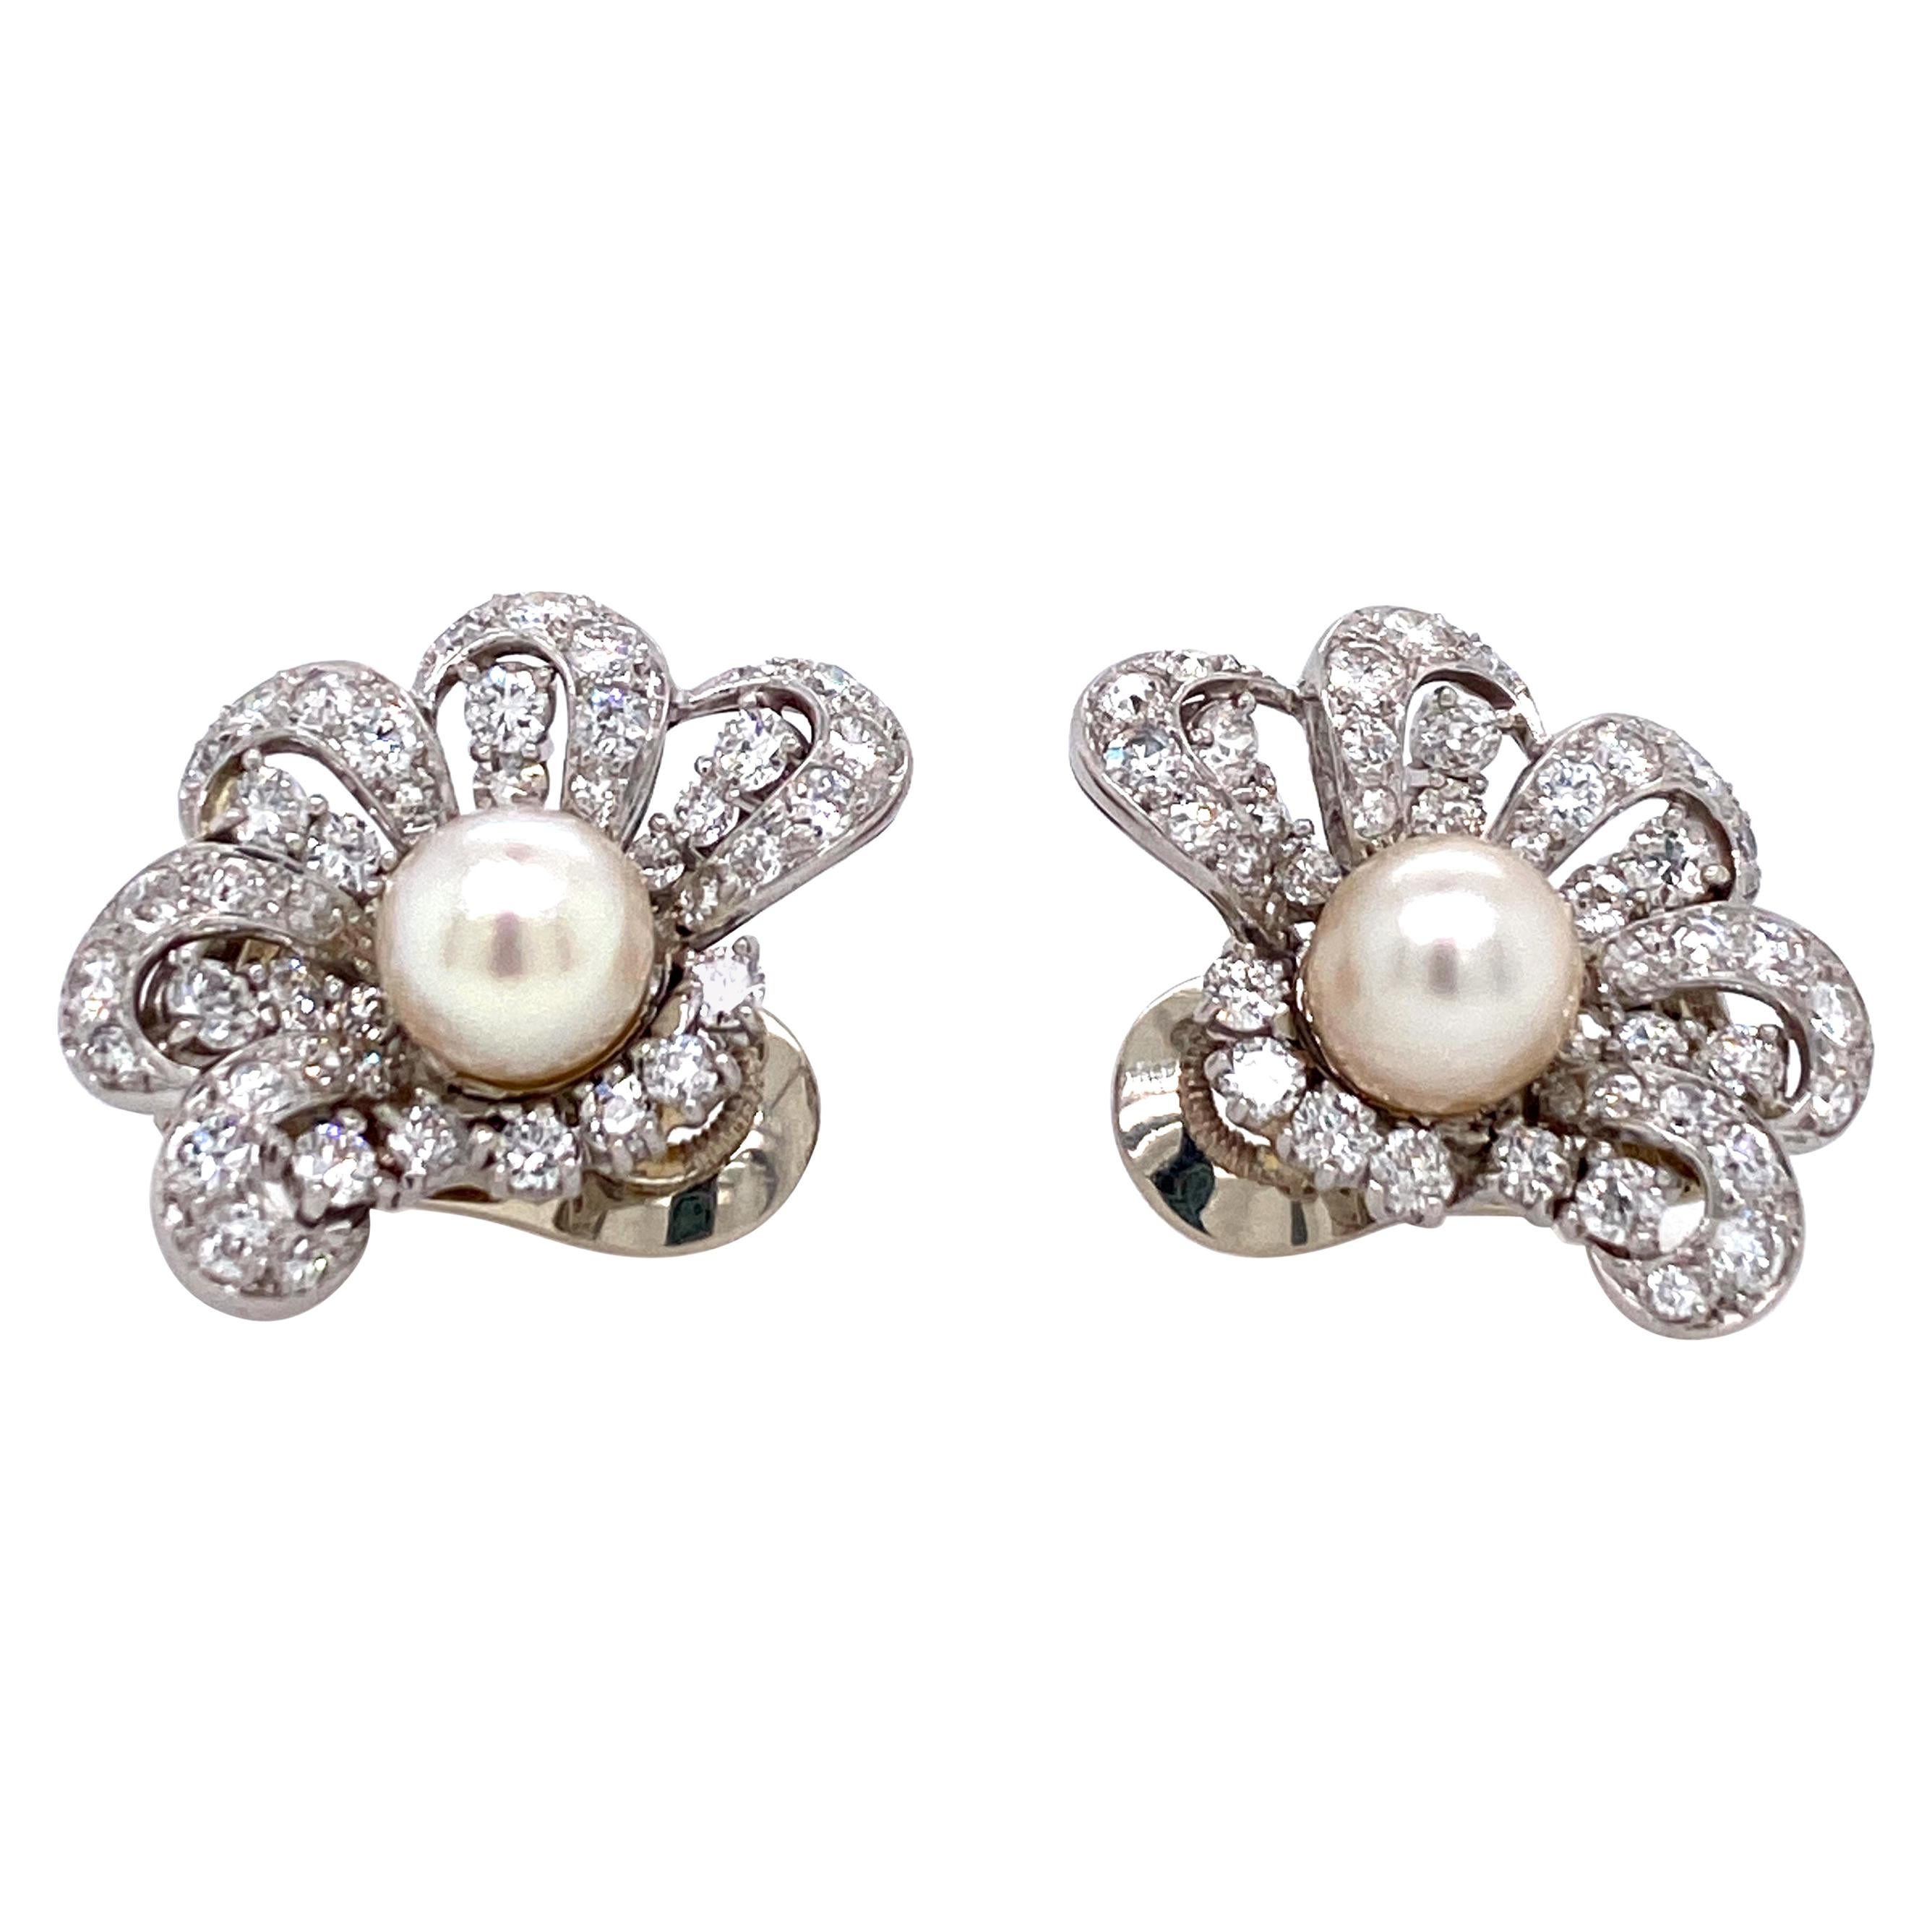 1930s Cartier Diamond and Pearl Non-Pierced Earrings